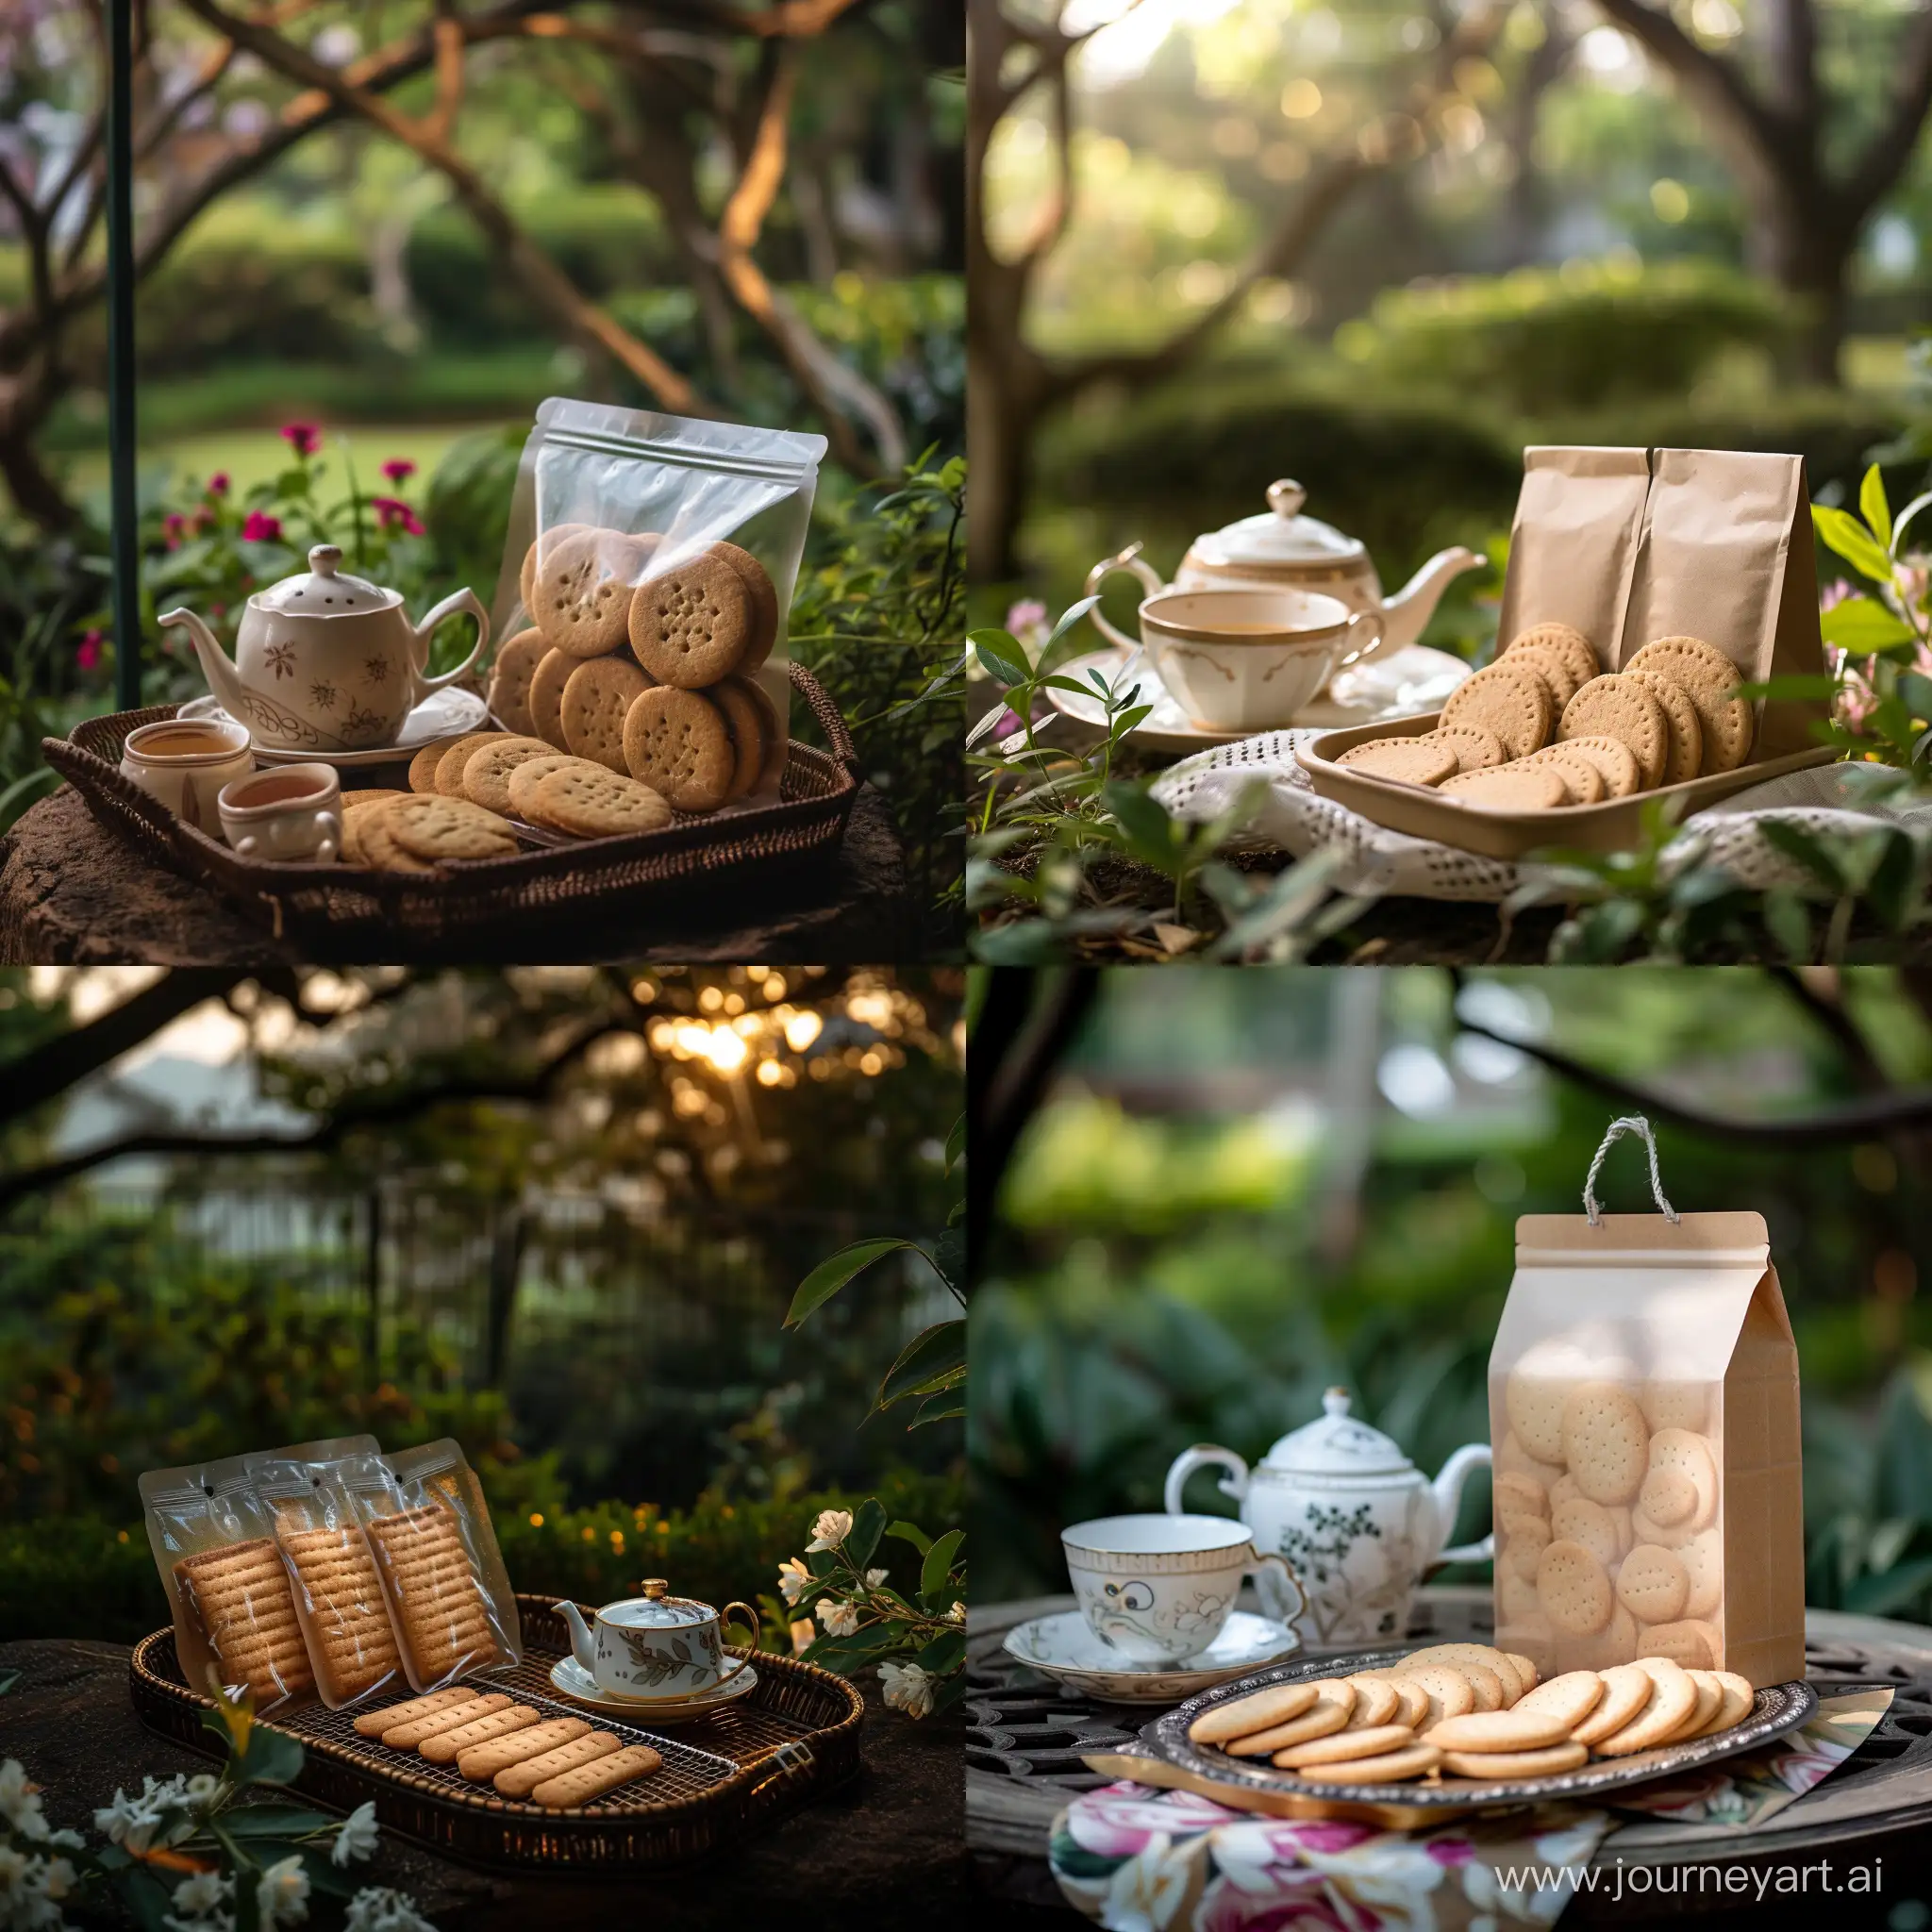 Cookies Packet with cookies in a tray with tea set in a garden, evening time